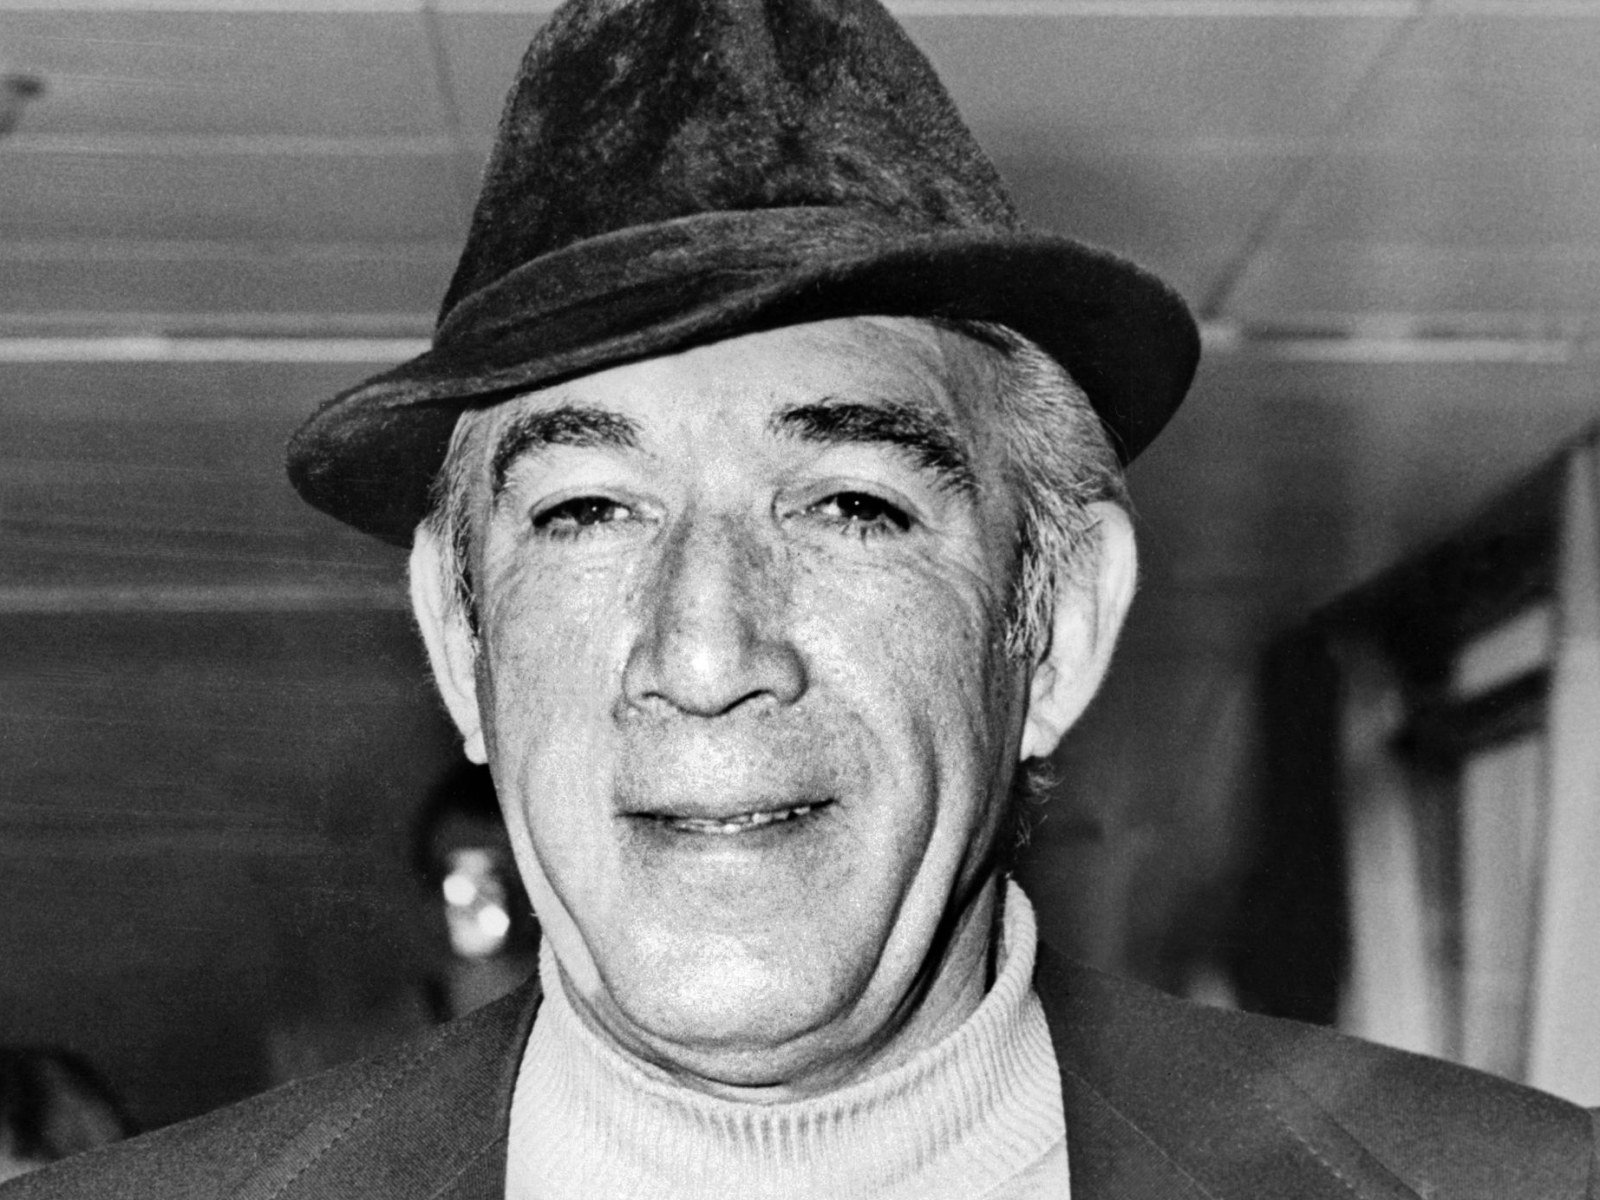 9/11 Predicted by Actor Anthony Quinn in a 1985 Painting, Book Claims